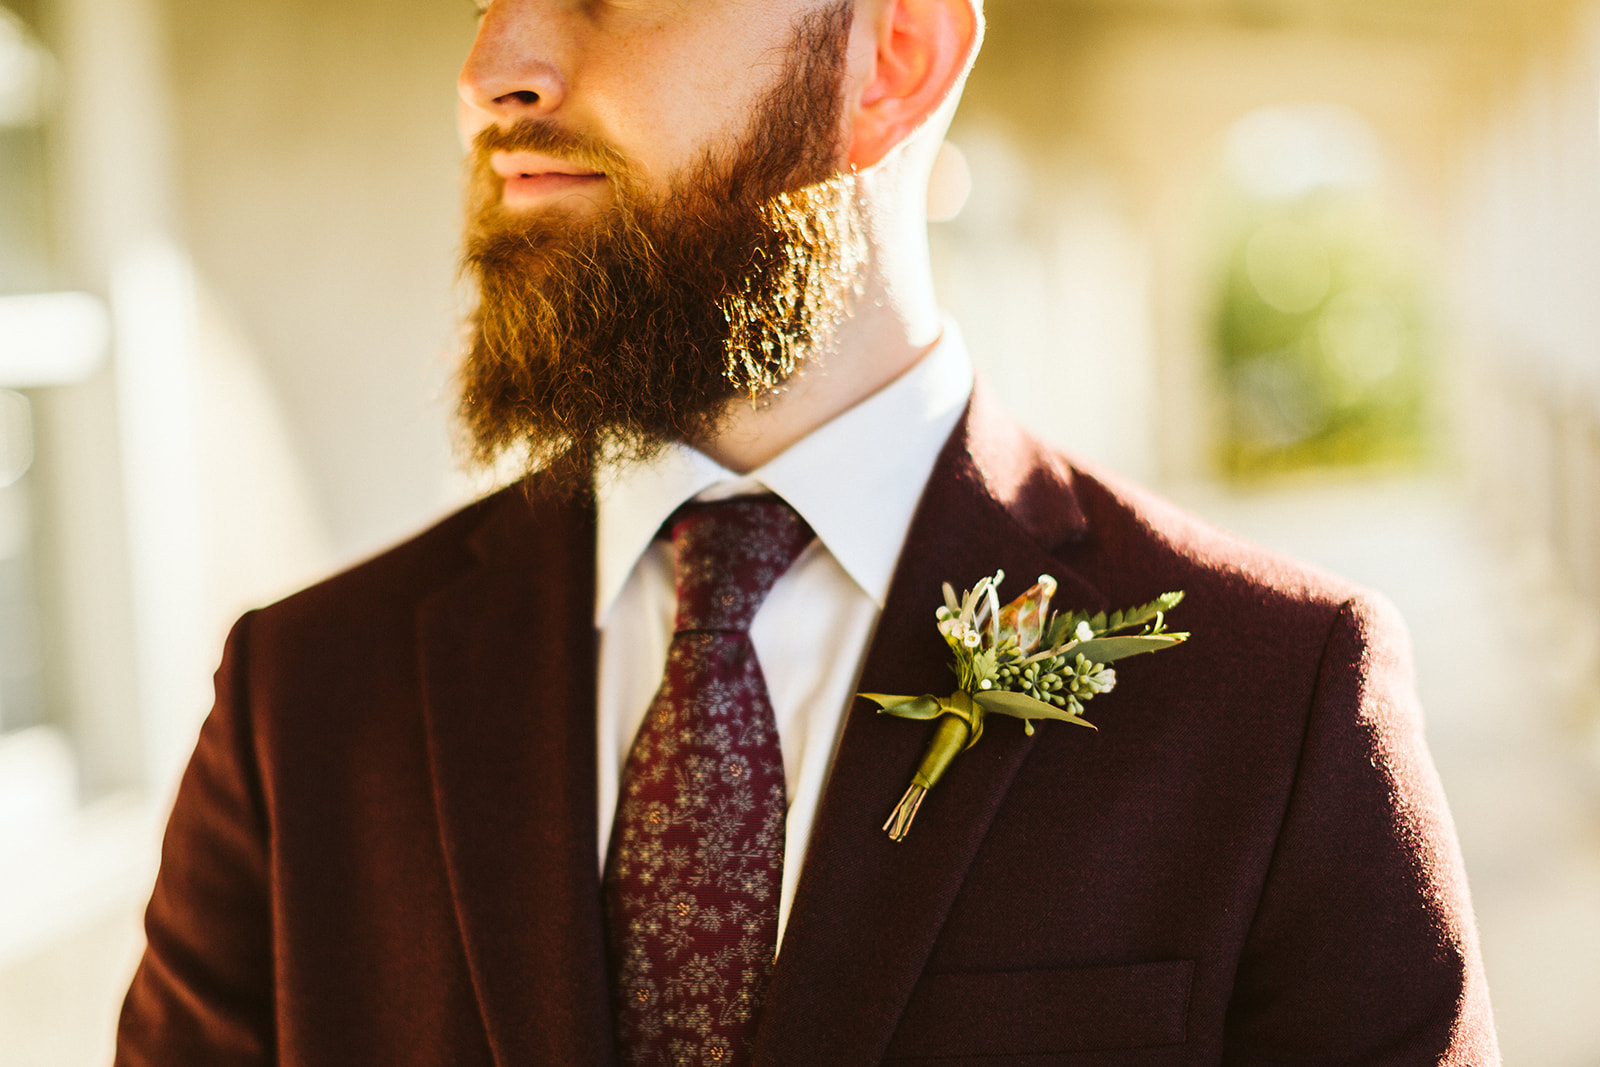 Close up of the grooms boutonniere pinned on his maroon suit coat